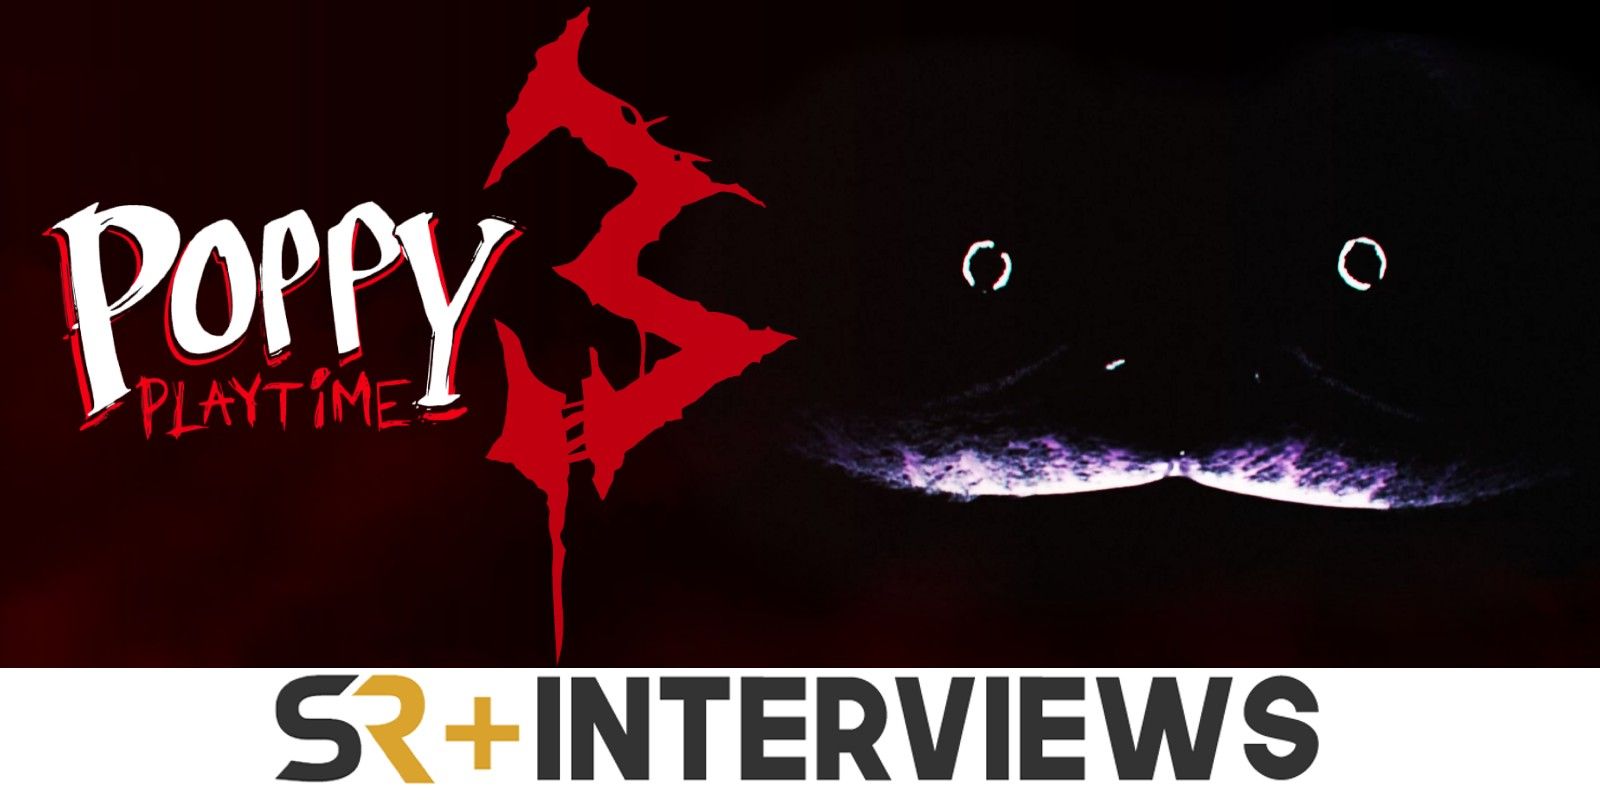 Poppy Playtime Chapter 3 logo on the left and a mysterious glowing mouth and eyes on the right, the SR+ Interviews logo below.